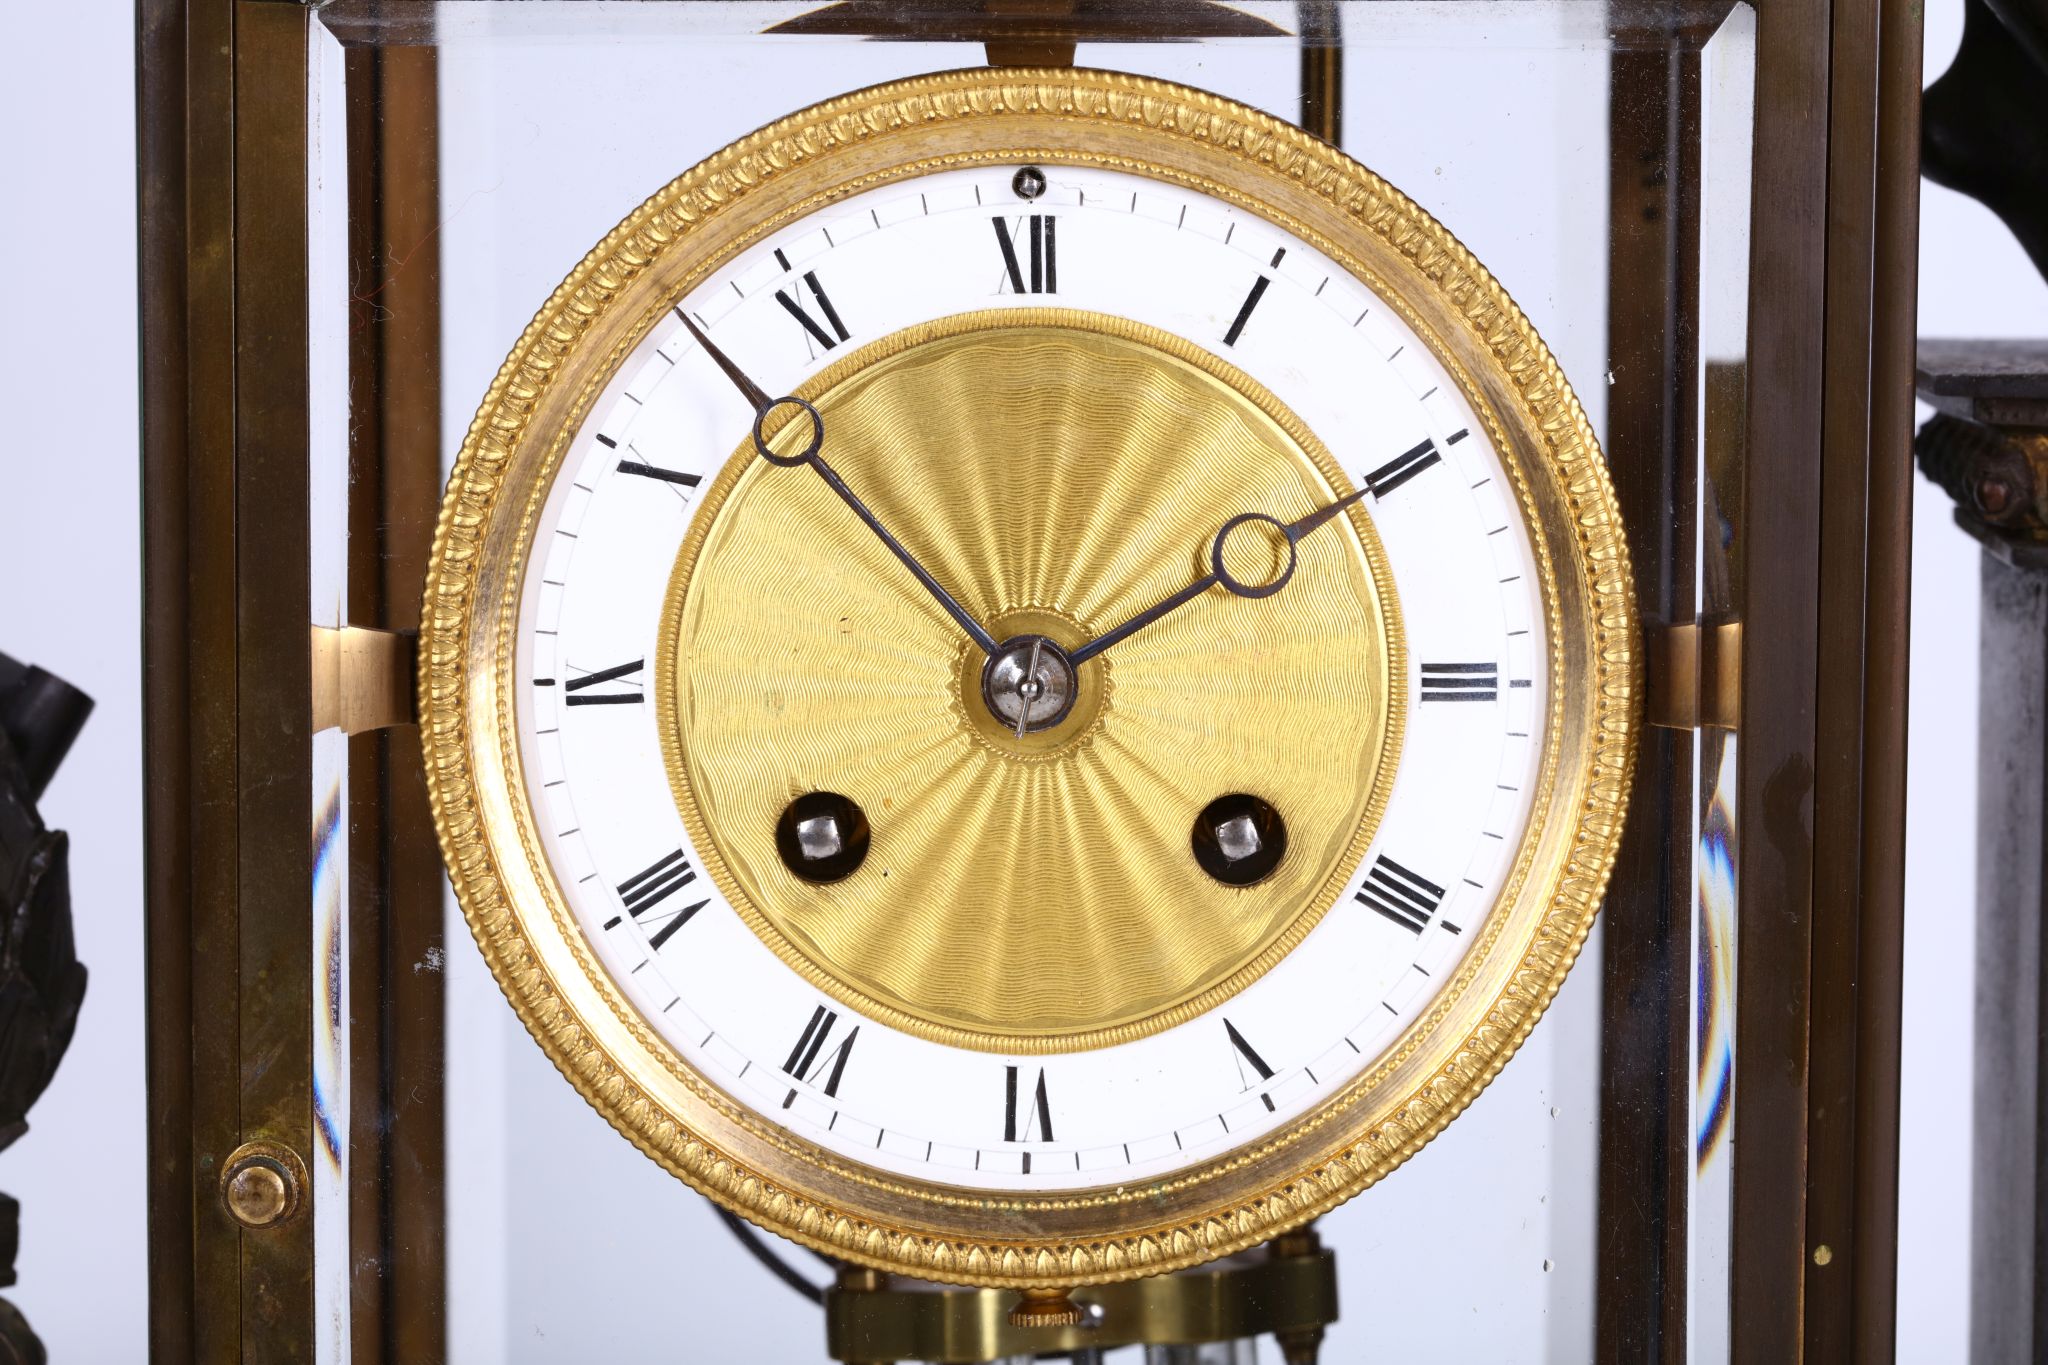 A 19TH CENTURY FRENCH EMPIRE STYLE  BRONZE MANTEL CLOCK WITH MASONIC PLAQUETTE the clock movement - Image 7 of 7